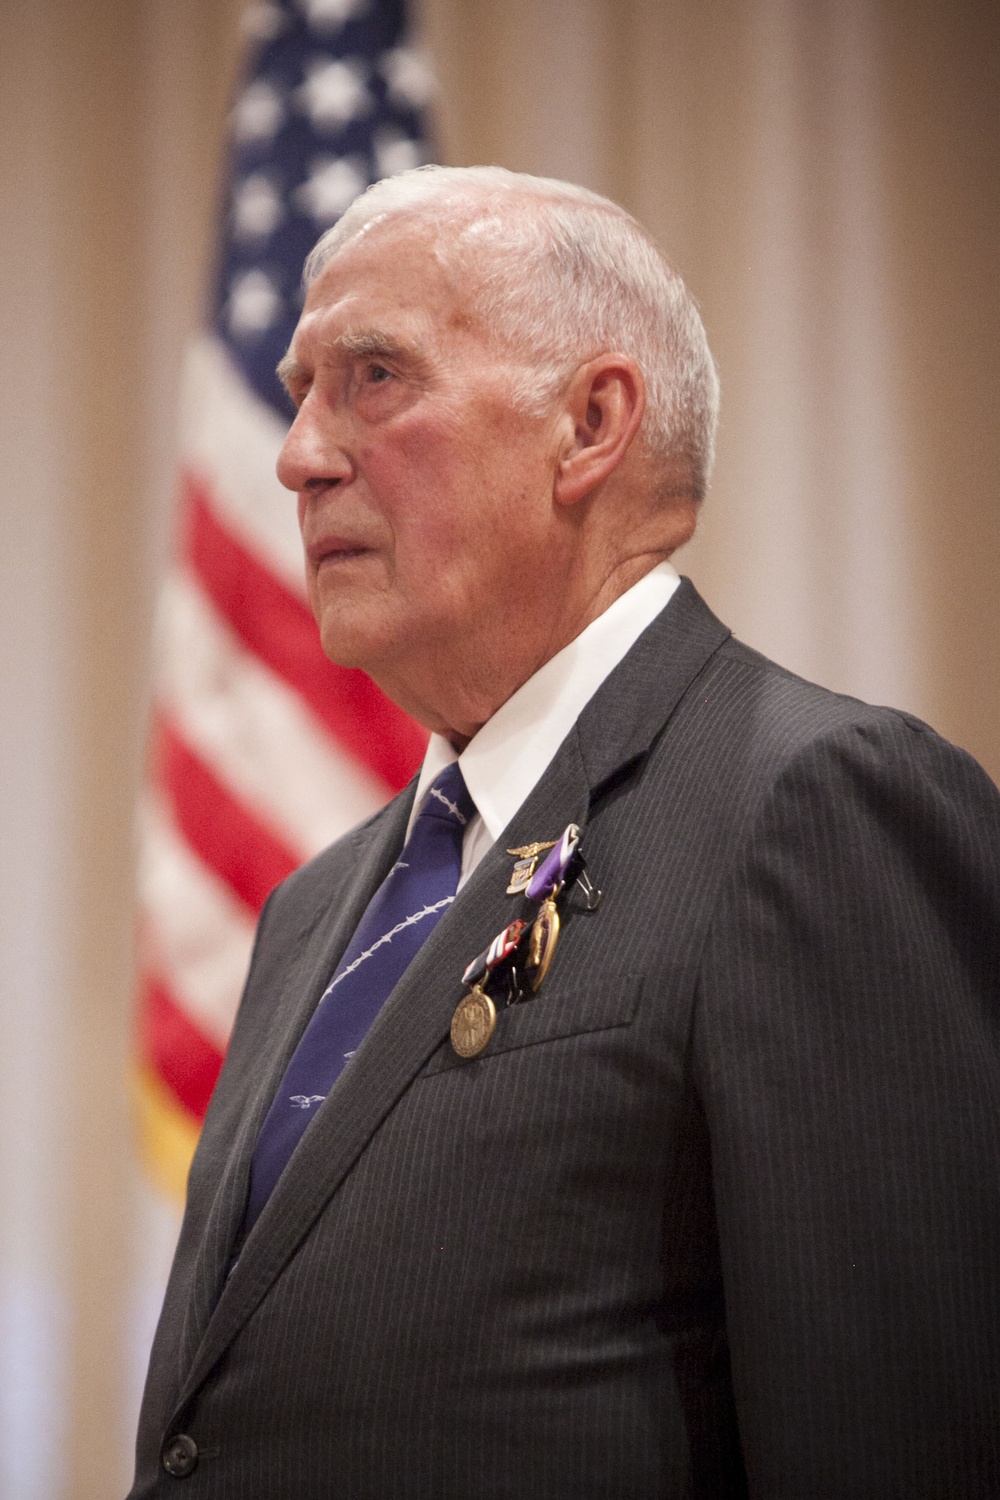 Ernest C. Brace awarded Purple Heart and POW Medals